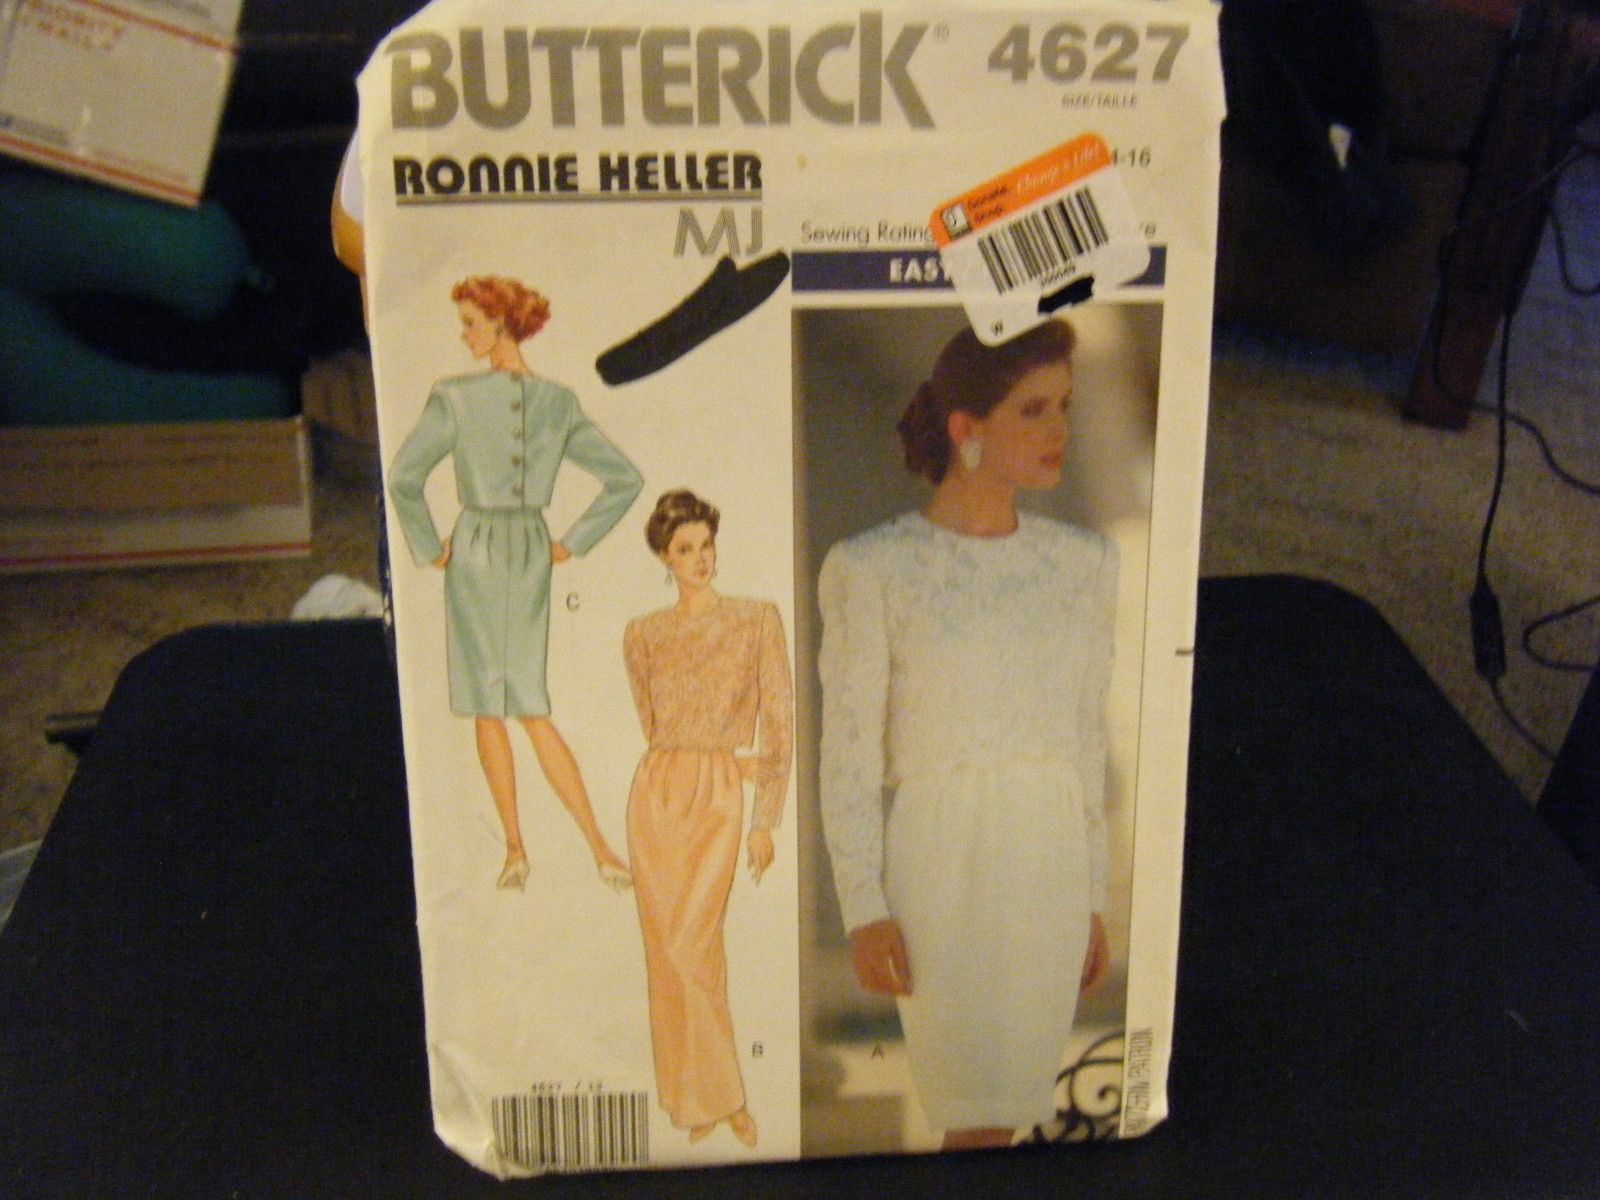 Primary image for Butterick Ronnie Heller 4627 Misses Top & Dress Pattern - Size 12/14/16